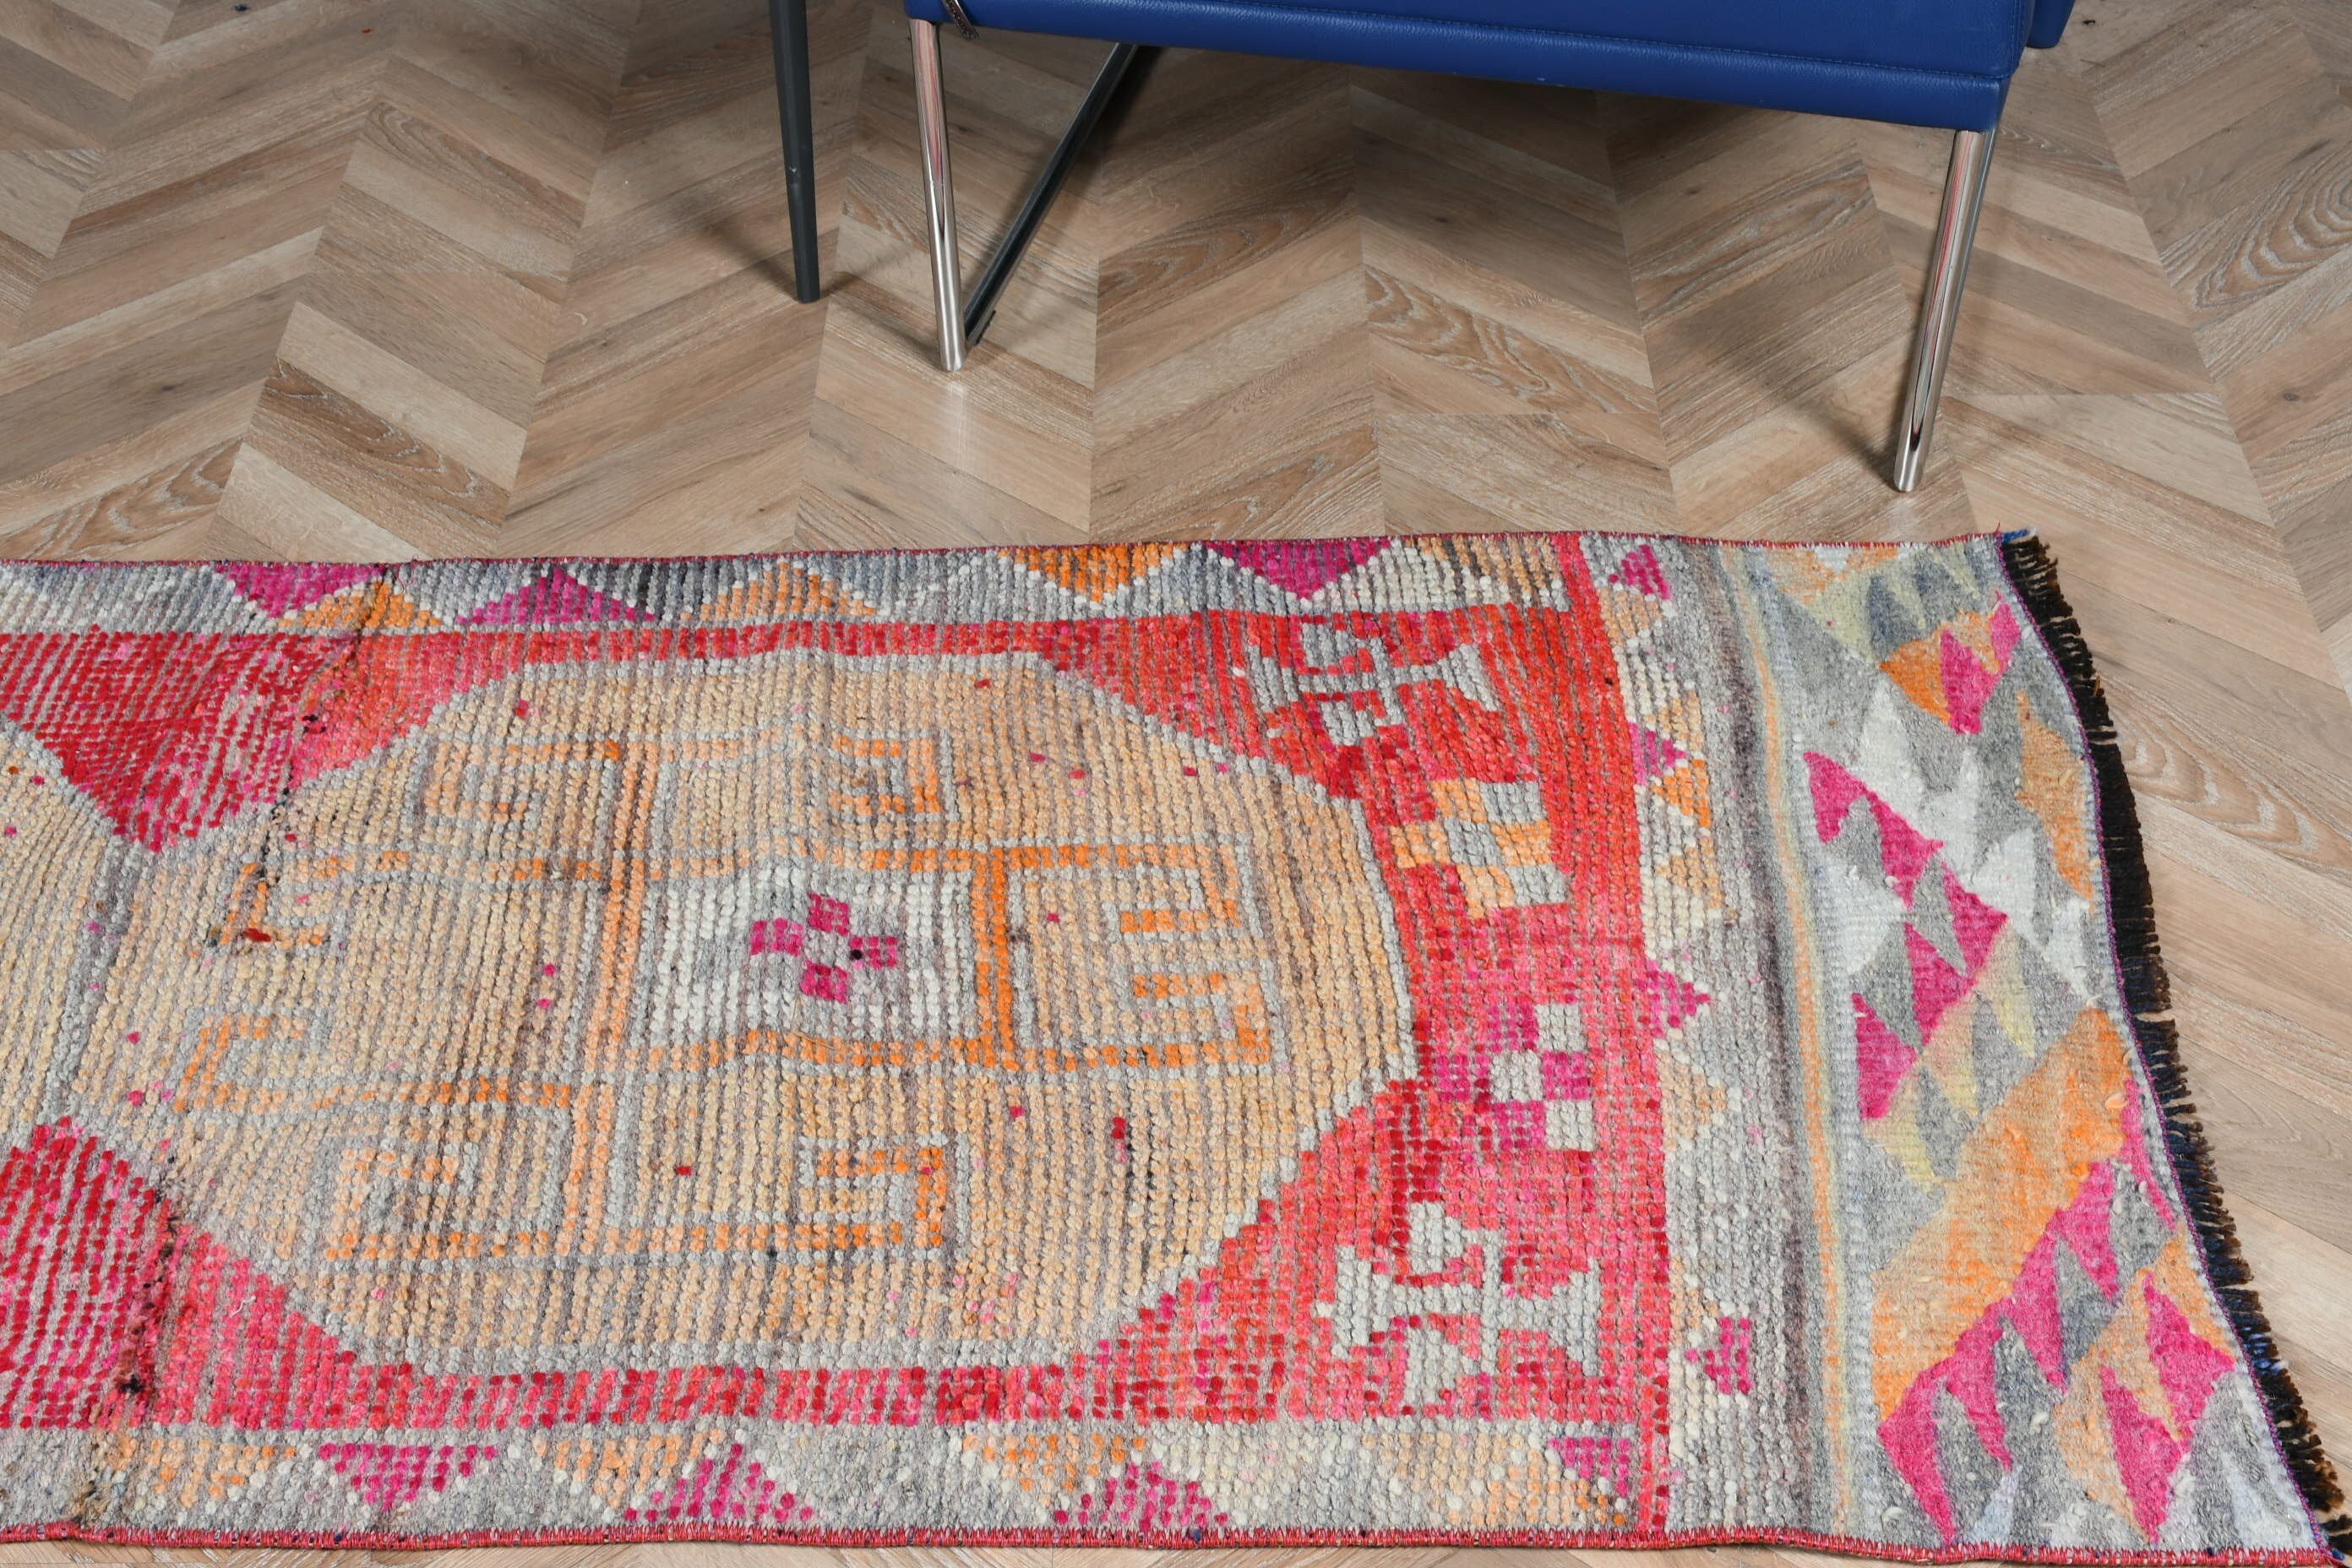 Kitchen Rug, Stair Rug, Antique Rug, 2.7x9.4 ft Runner Rug, Turkish Rugs, Rugs for Stair, Home Decor Rug, Pink Anatolian Rugs, Vintage Rug